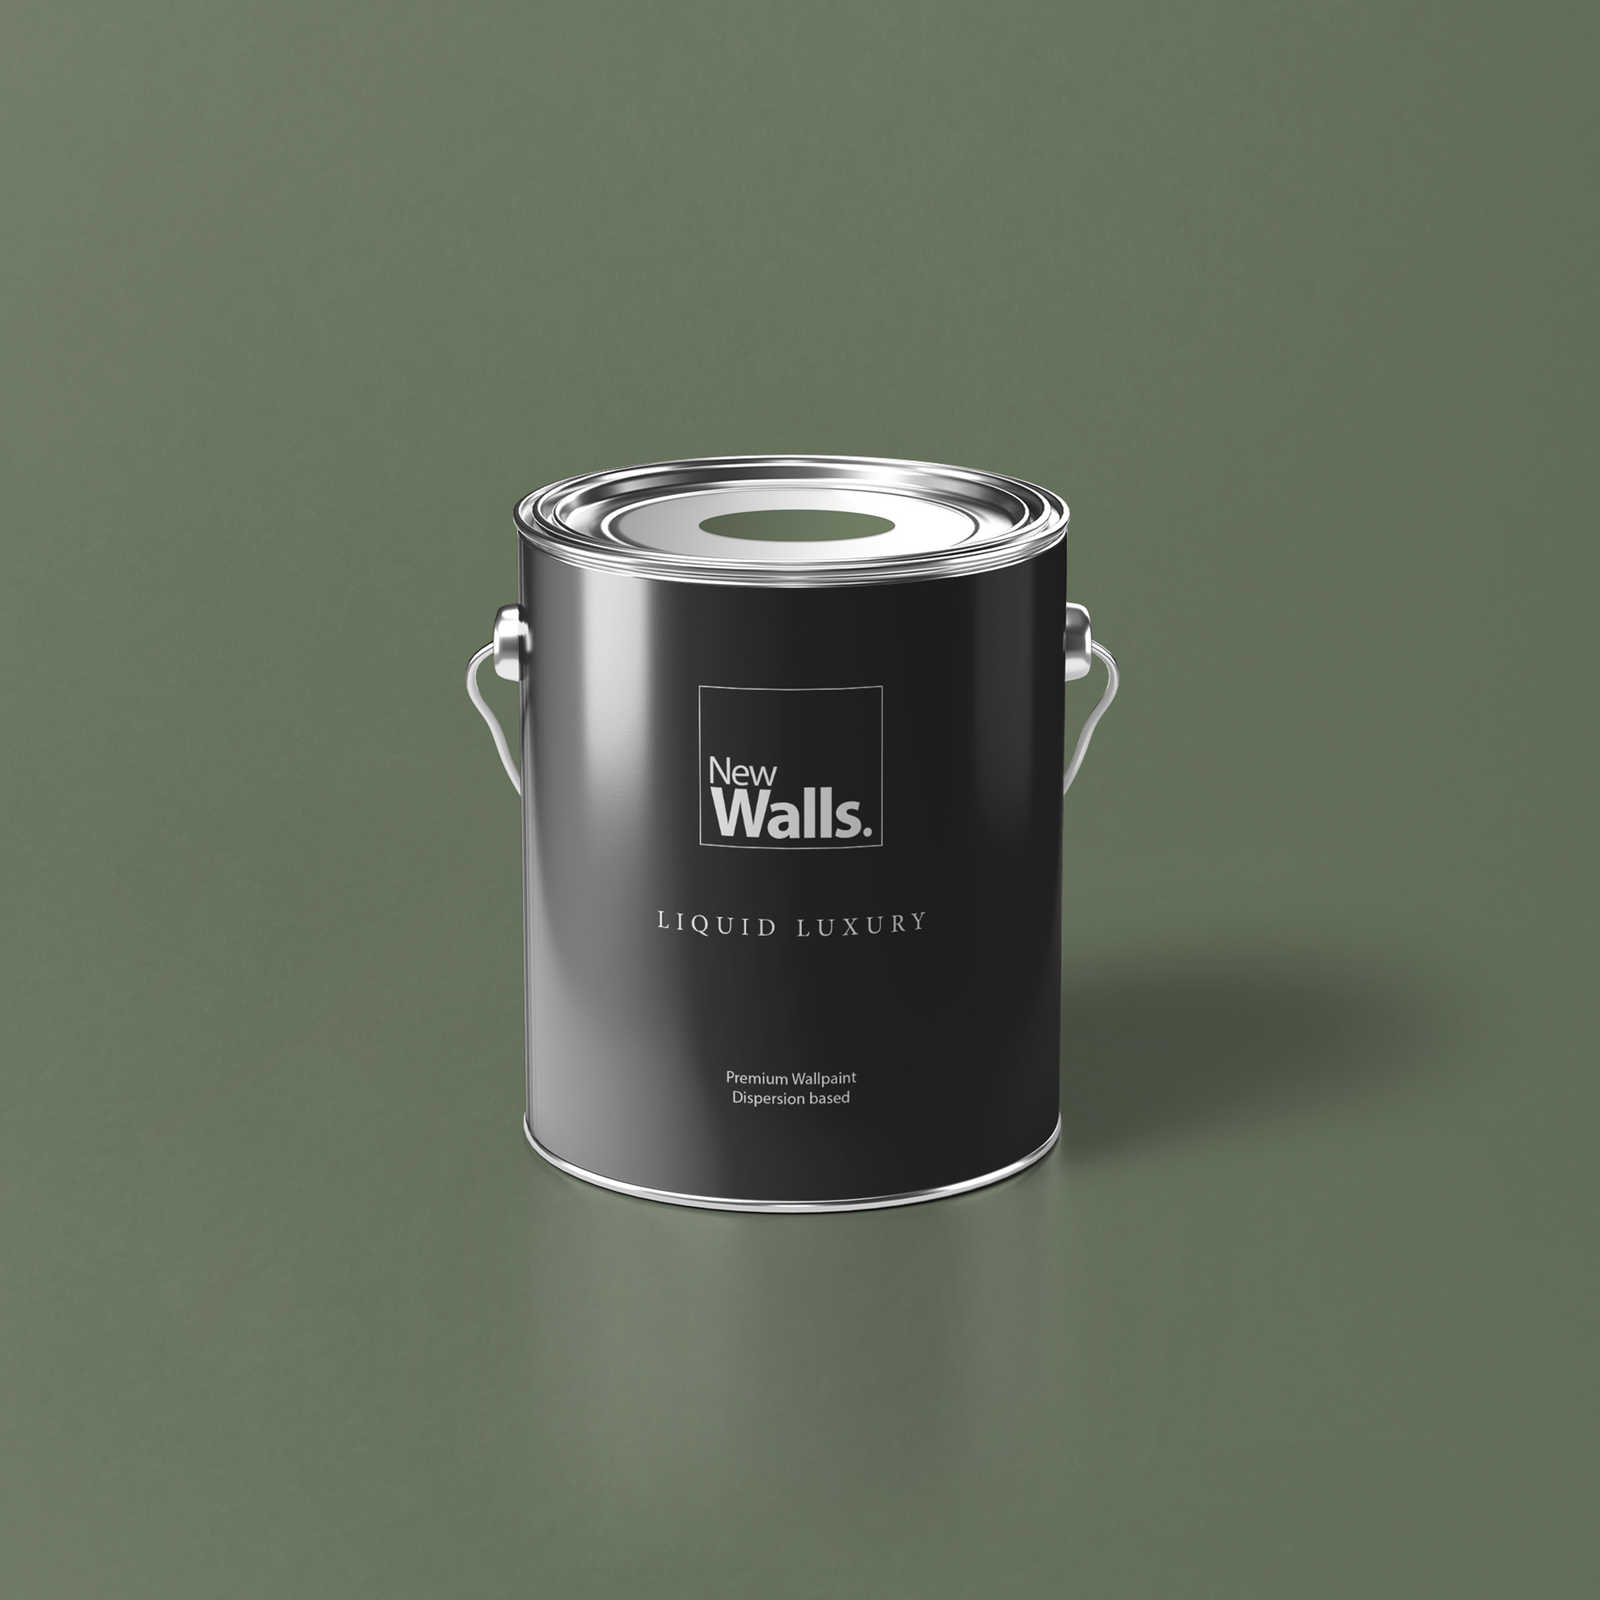 Premium Wall Paint Relaxing Olive Green »Gorgeous Green« NW504 – 2.5 litre
